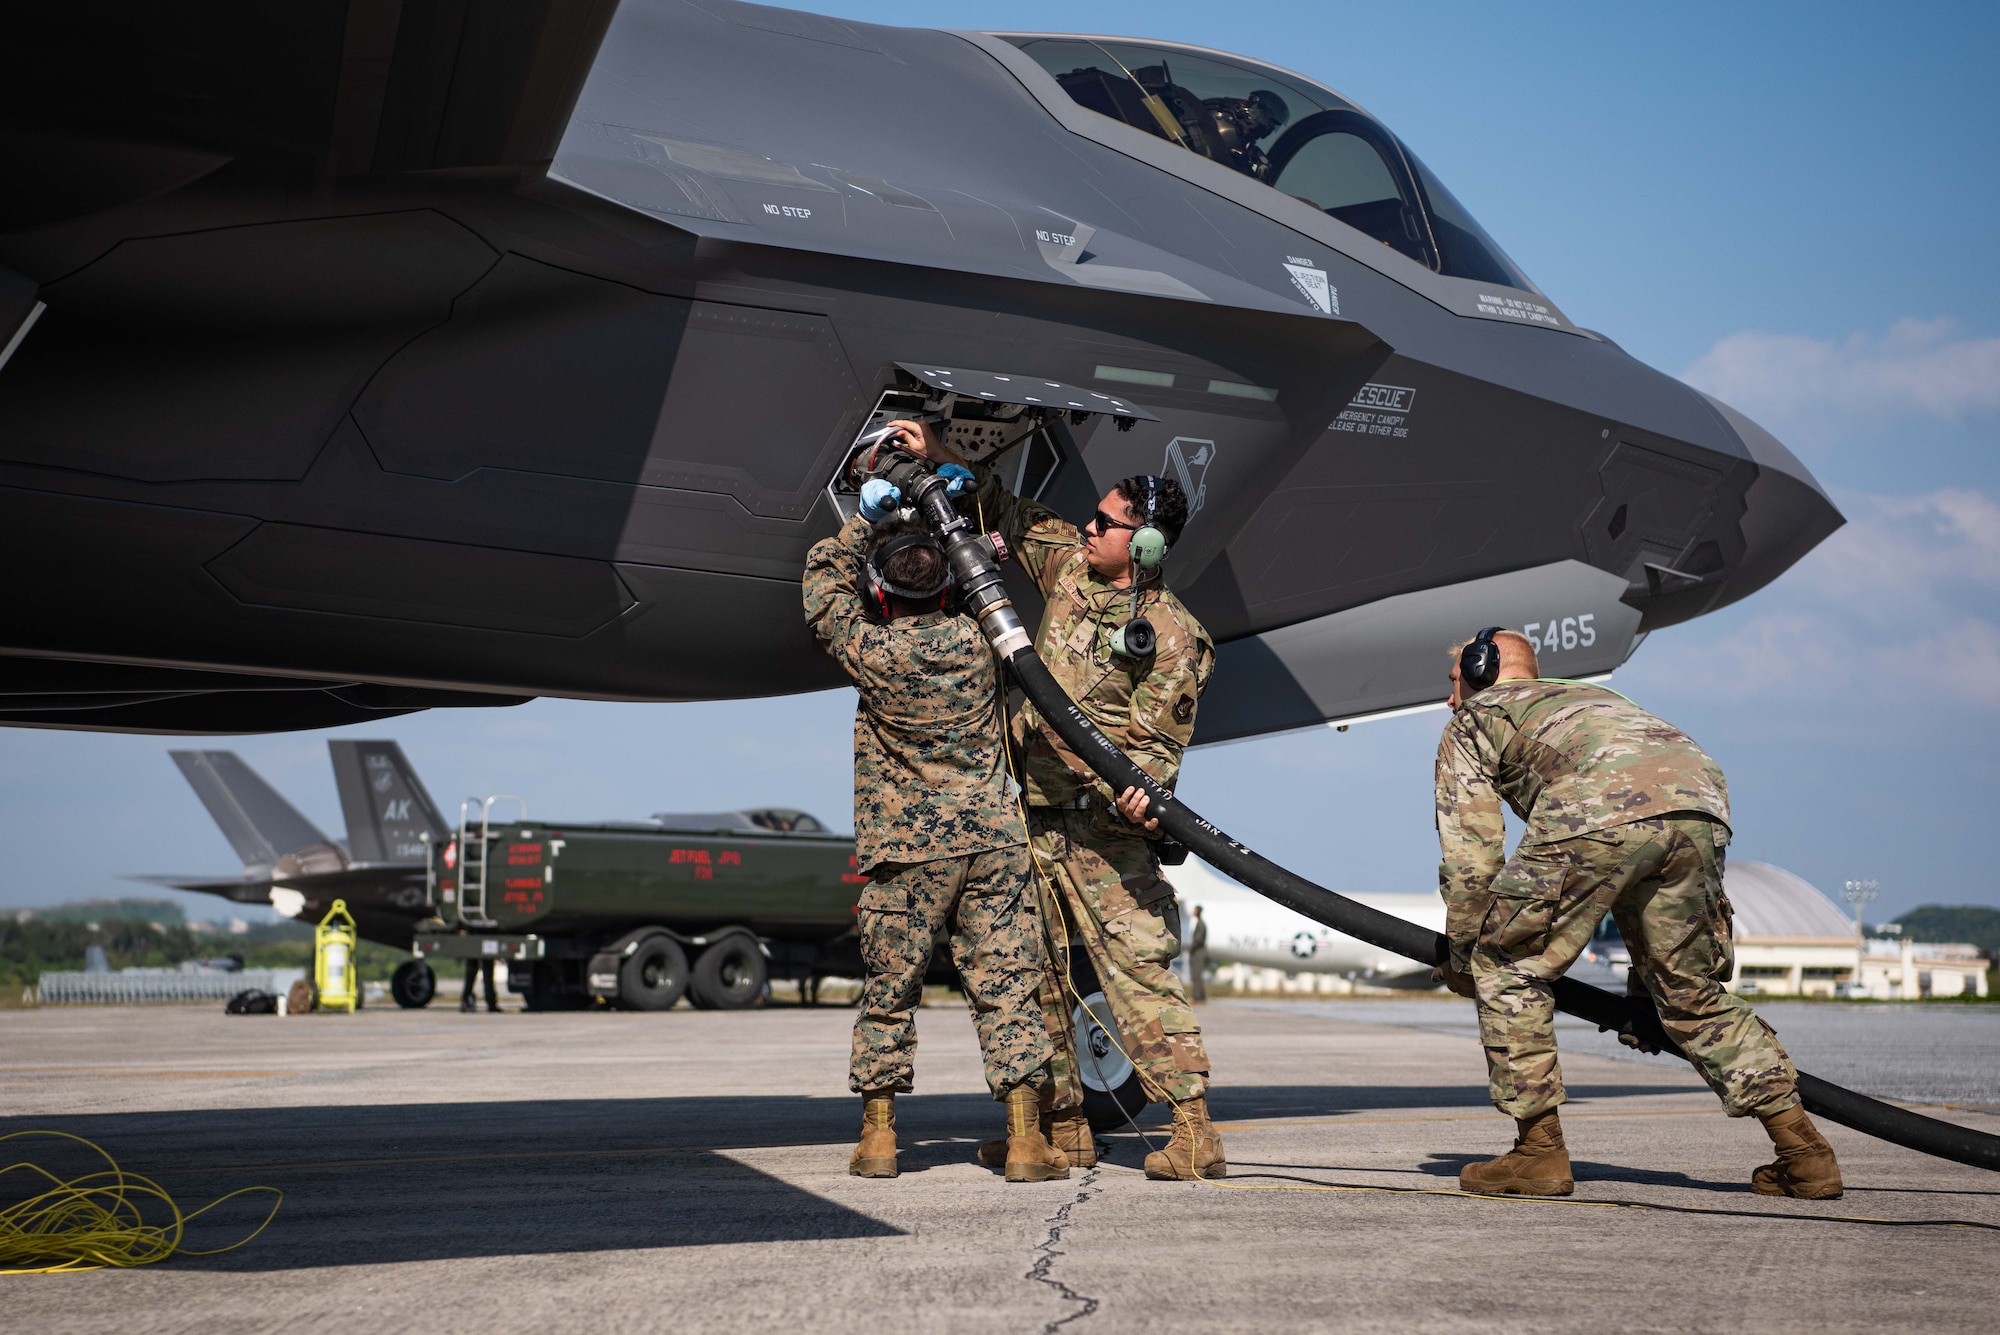 Airmen and Marines conduct hot pit refueling on a F-35A Lightning II.